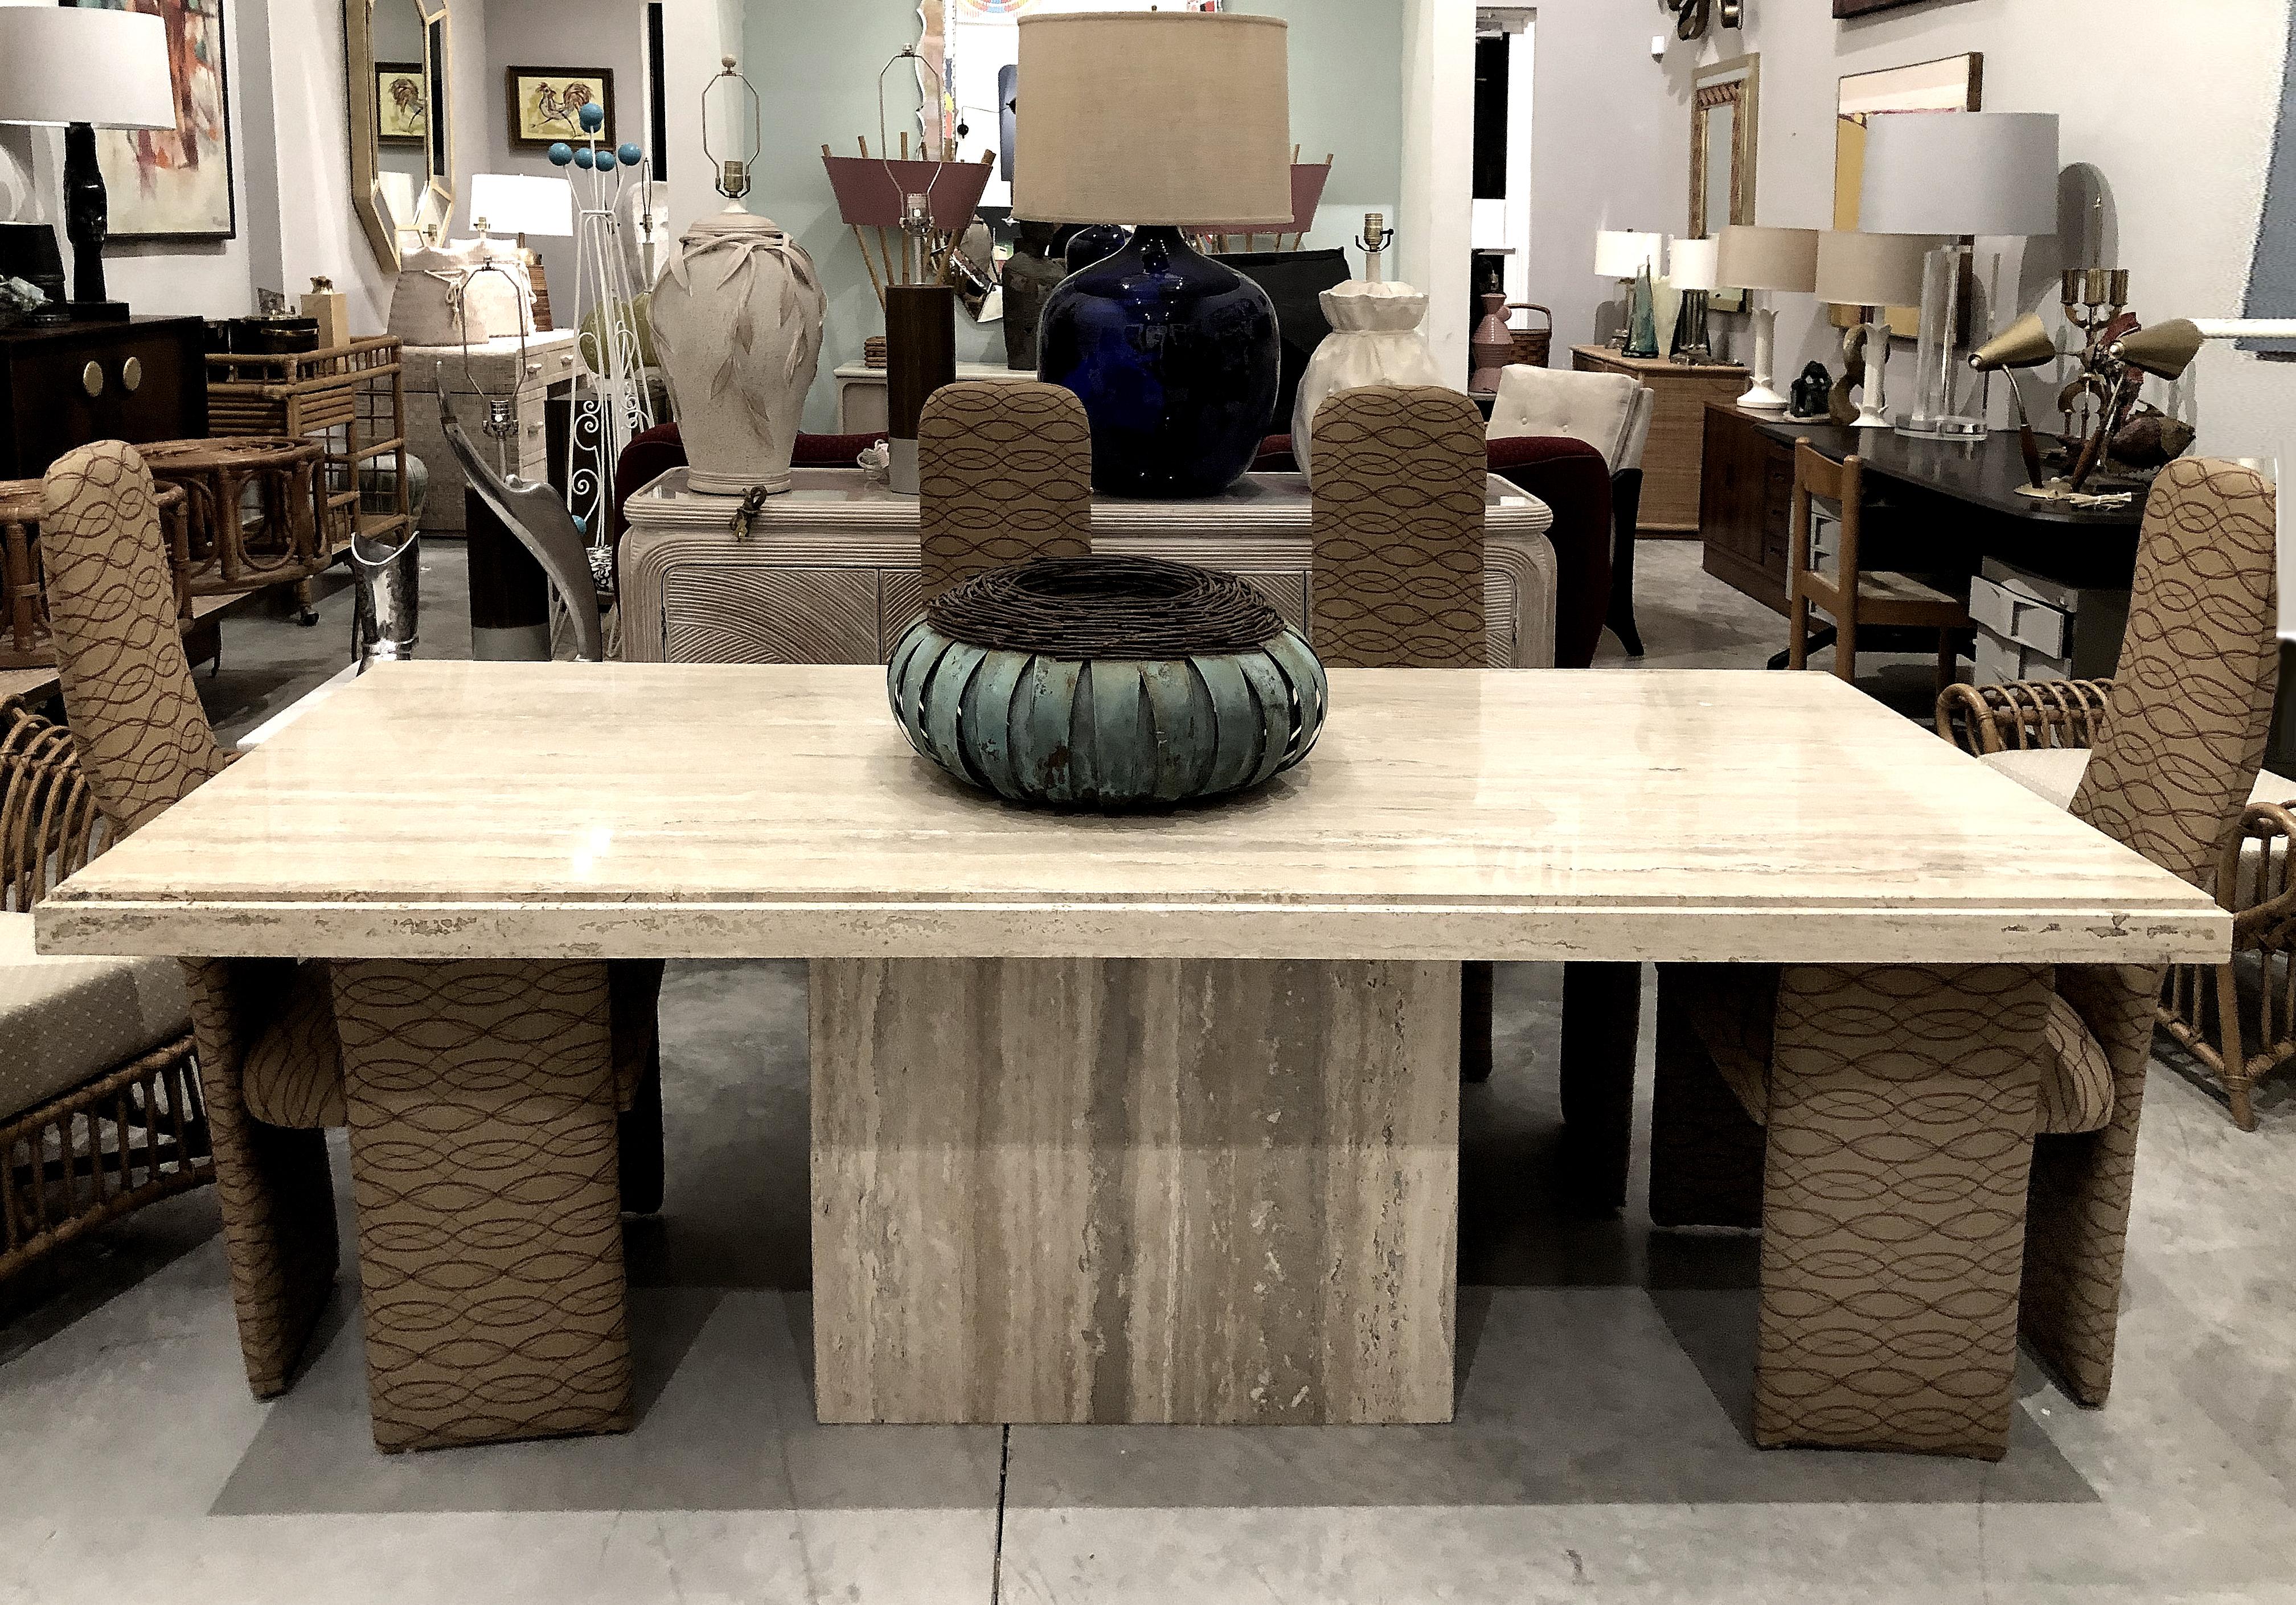 1970s polished Italian travertine stone dining table

Offered for sale is a stunning 1970s Italian select polished travertine dining table on a monolithic pedestal base. The top and base have great linear veining and the apron edge has a step-down